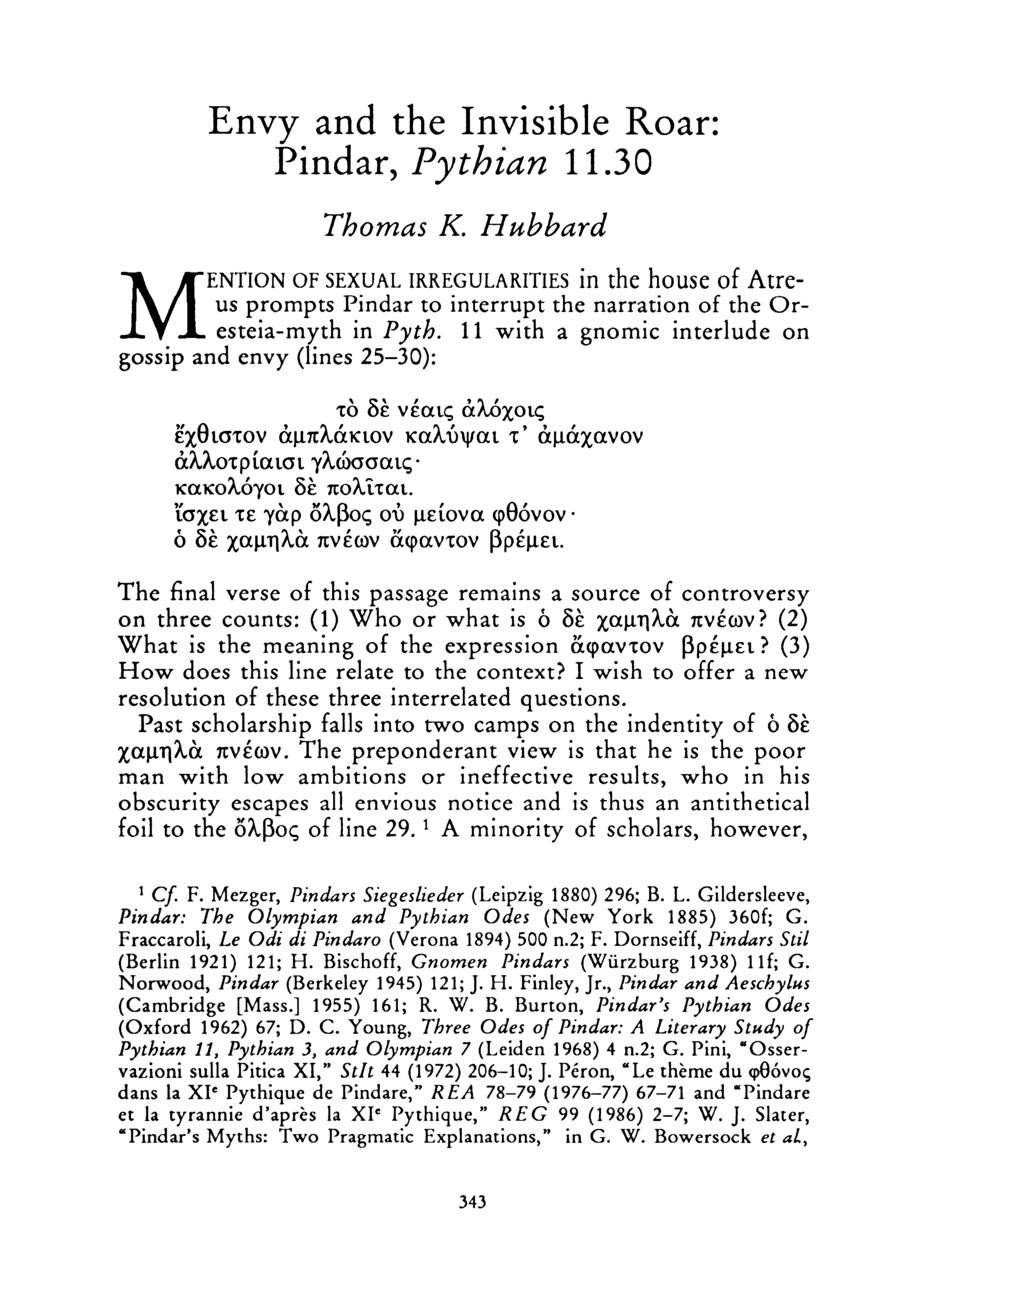 M ENTION Envy and the Invisible Roar: Pindar, Pythian 11.30 Thomas K. Hubbard OF SEXUAL IRREGULARITIES in the house of Atreus prompts Pindar to interrupt the narration of the Oresteia-myth in Pyth.